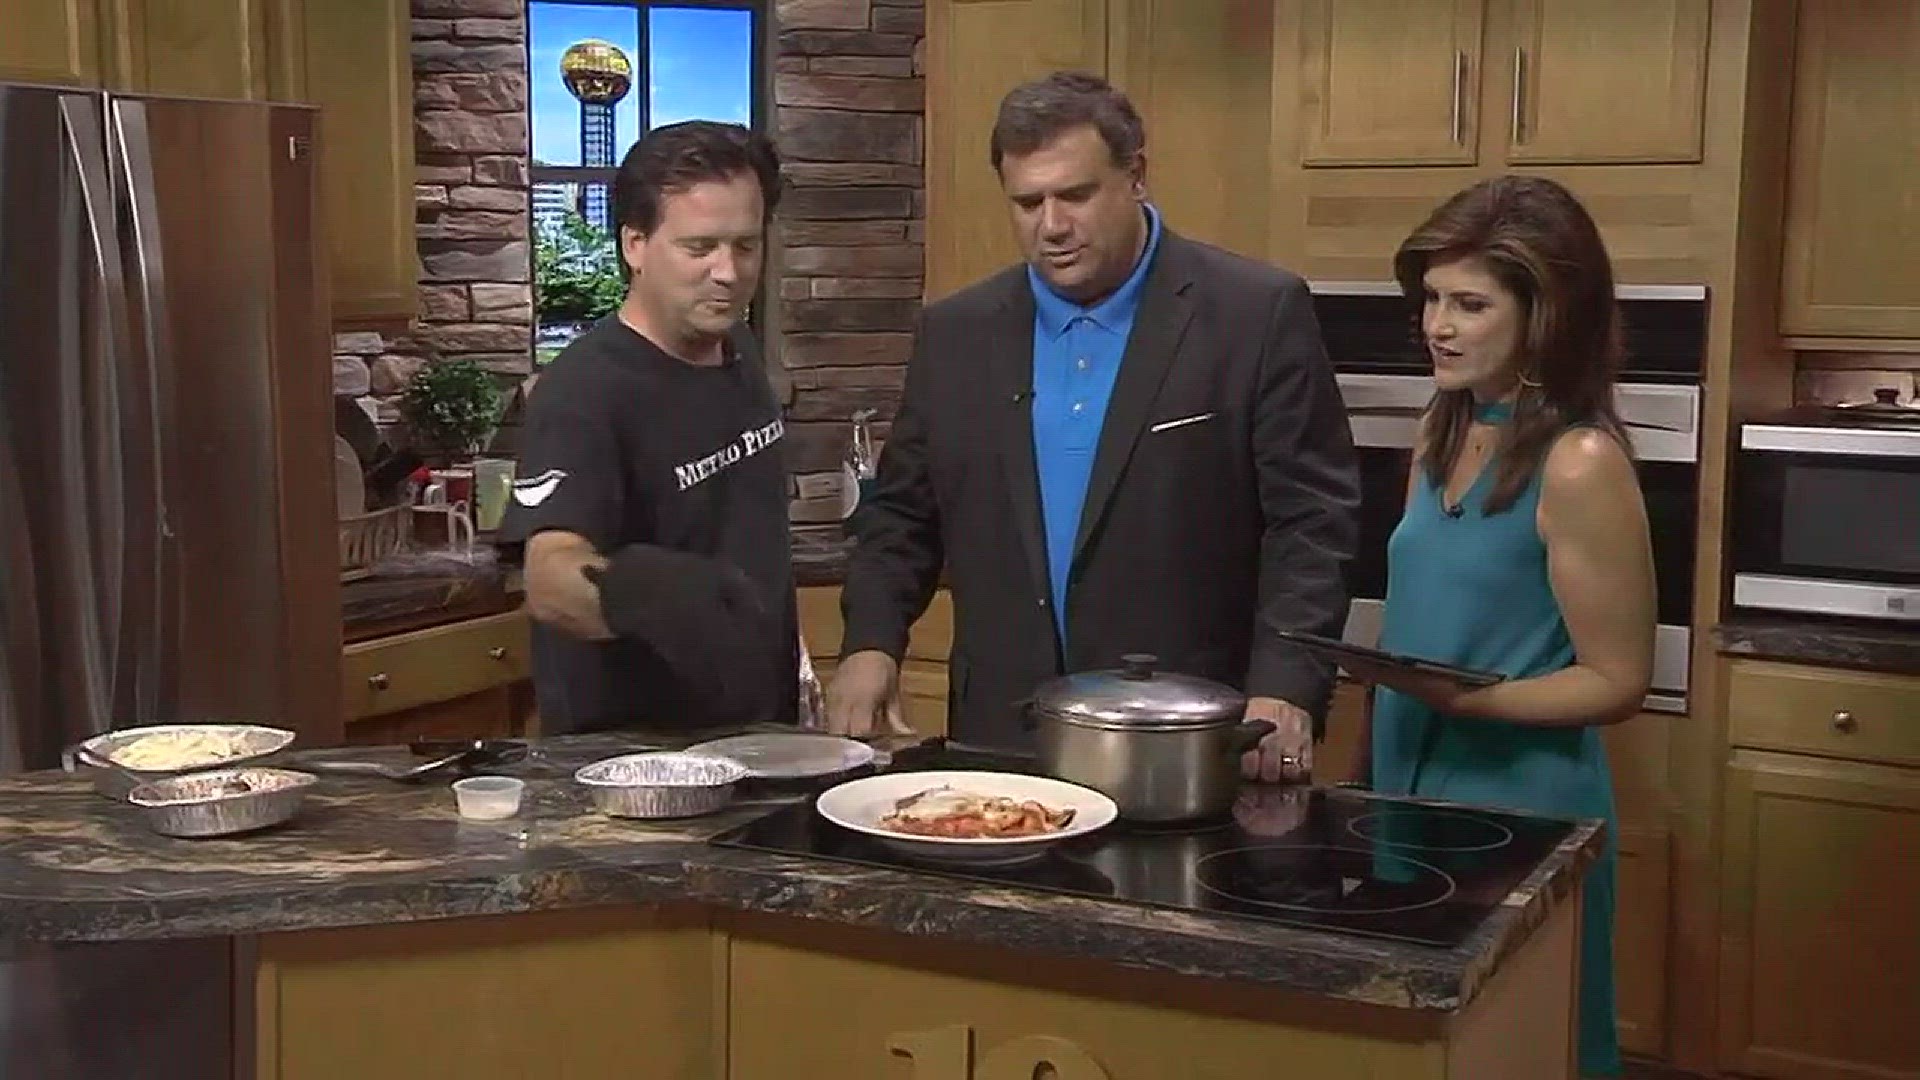 Jay Bernard with Metro Pizza makes gnocchi with Italian sausage. Metro Pizza is located in Alcoa, mmmetropizza.comSeptember 21, 2017, 4pm